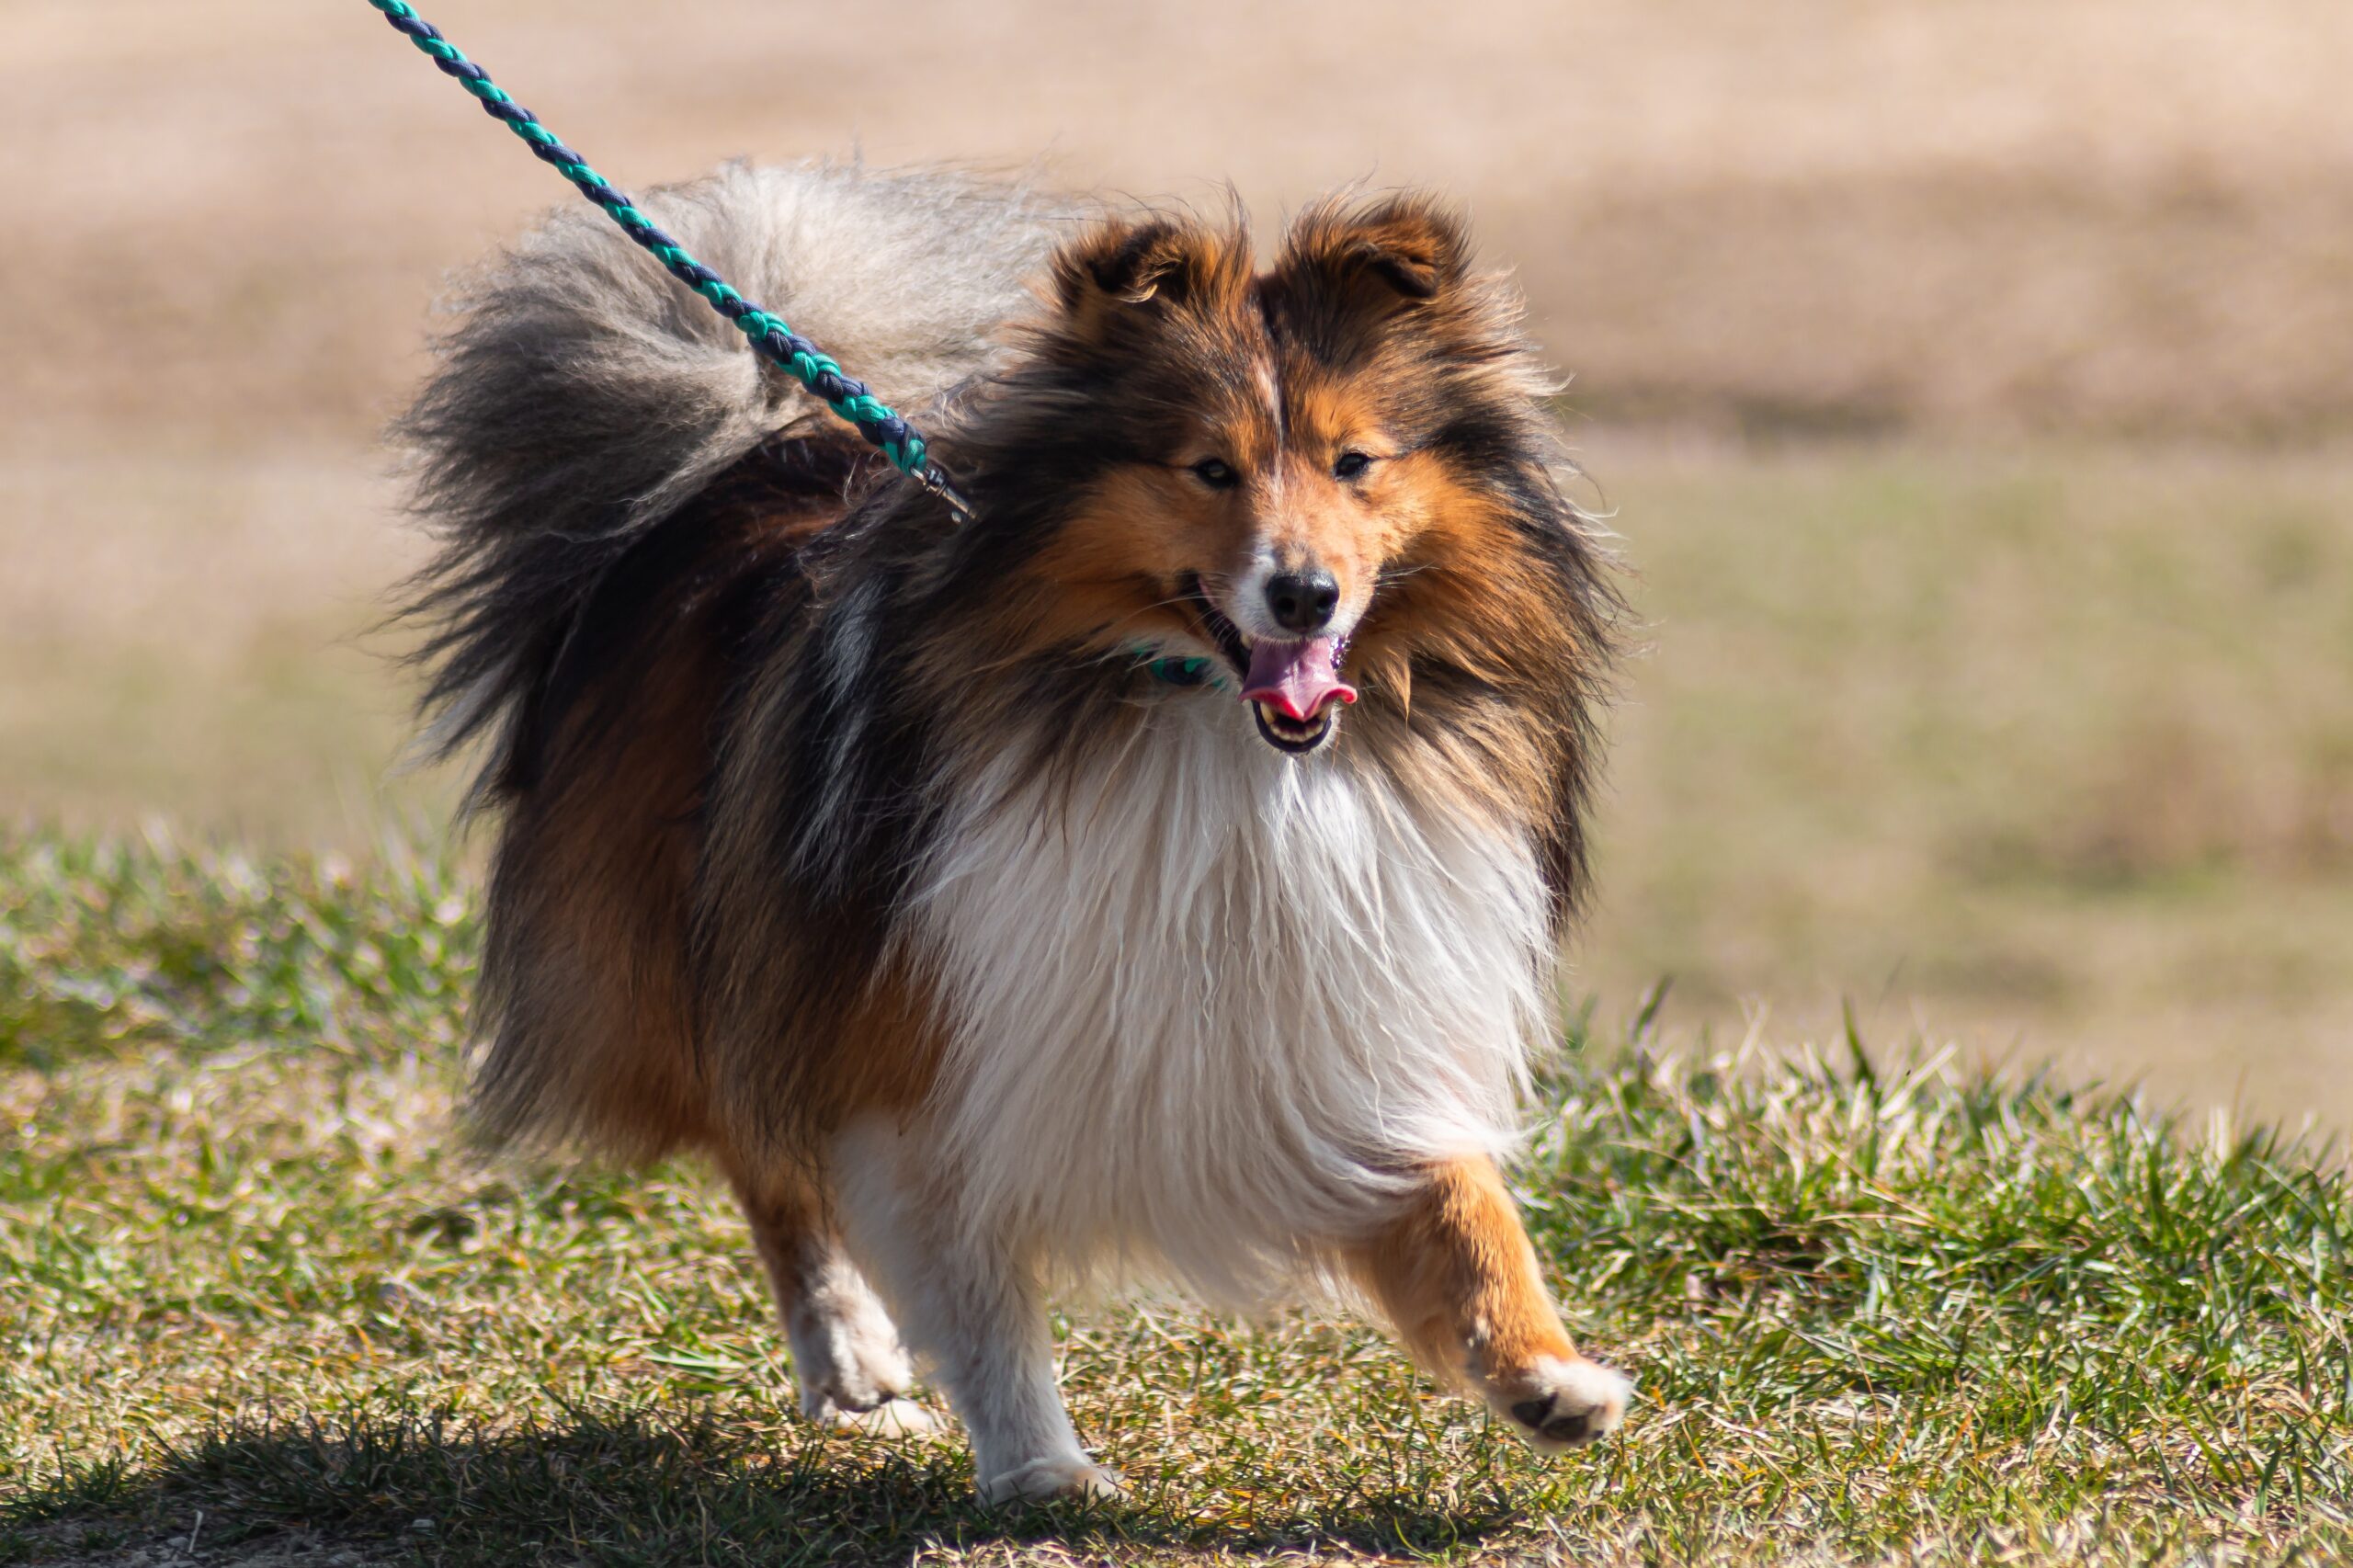 Emergency Red Flags For Sheltie Owners